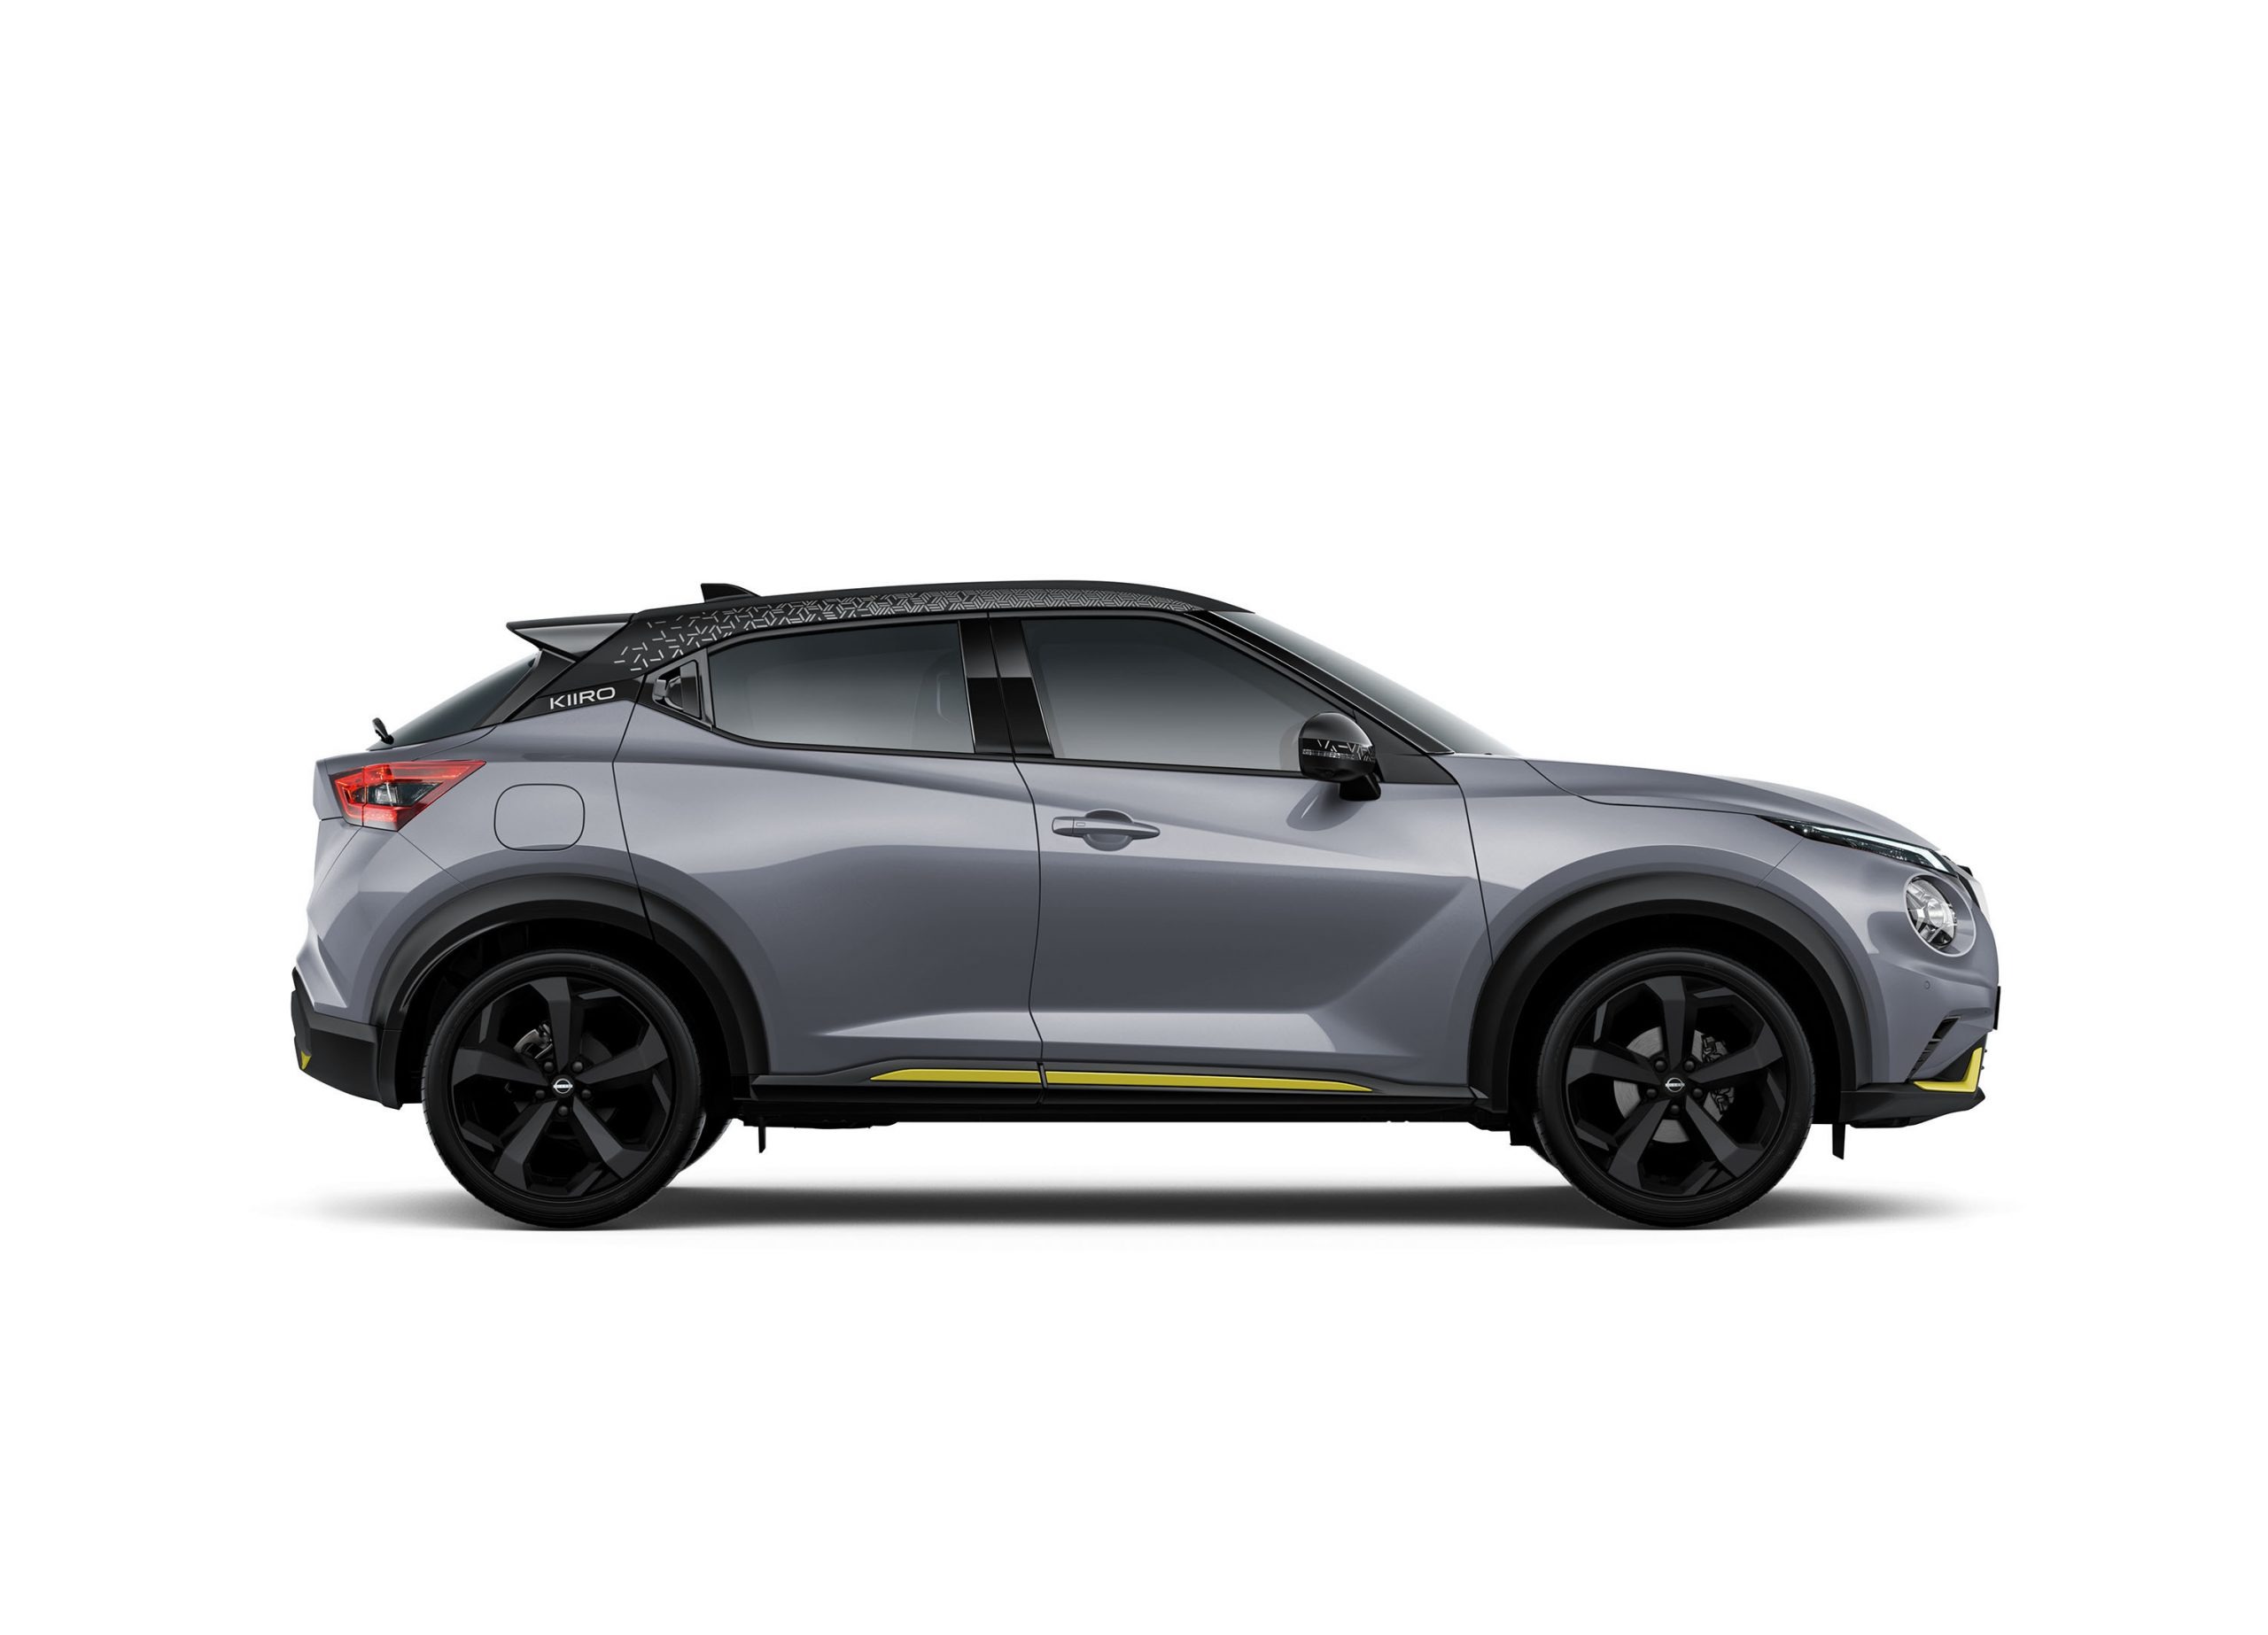 Nissan Juke Kiiro special version brings eye-catching sophistication to the small crossover segment